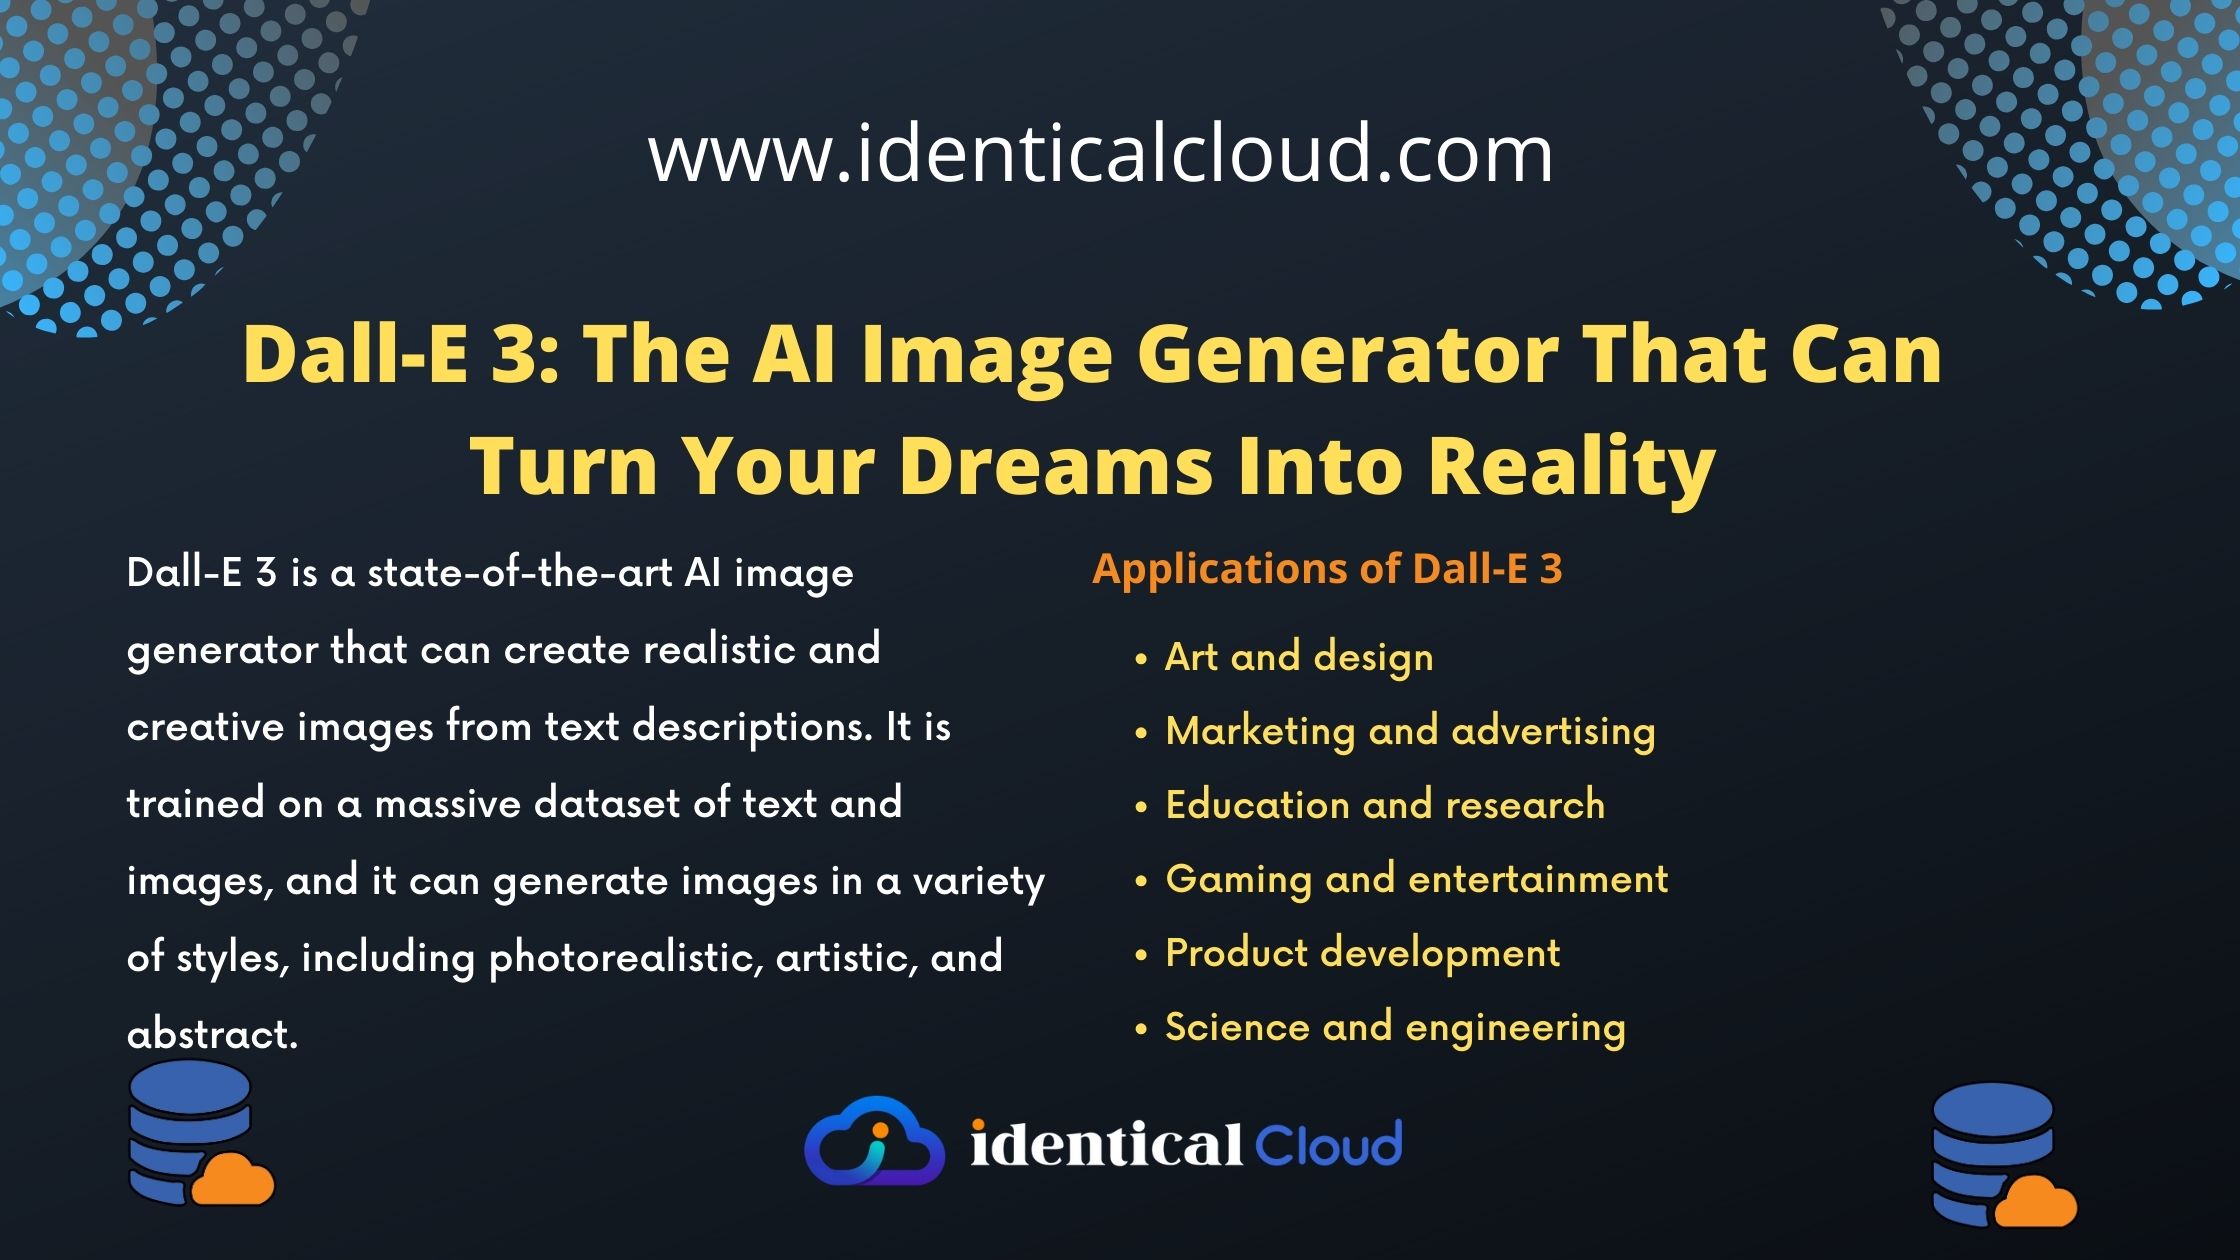 Dall-E 3 The AI Image Generator That Can Turn Your Dreams Into Reality - identicalcloud.com